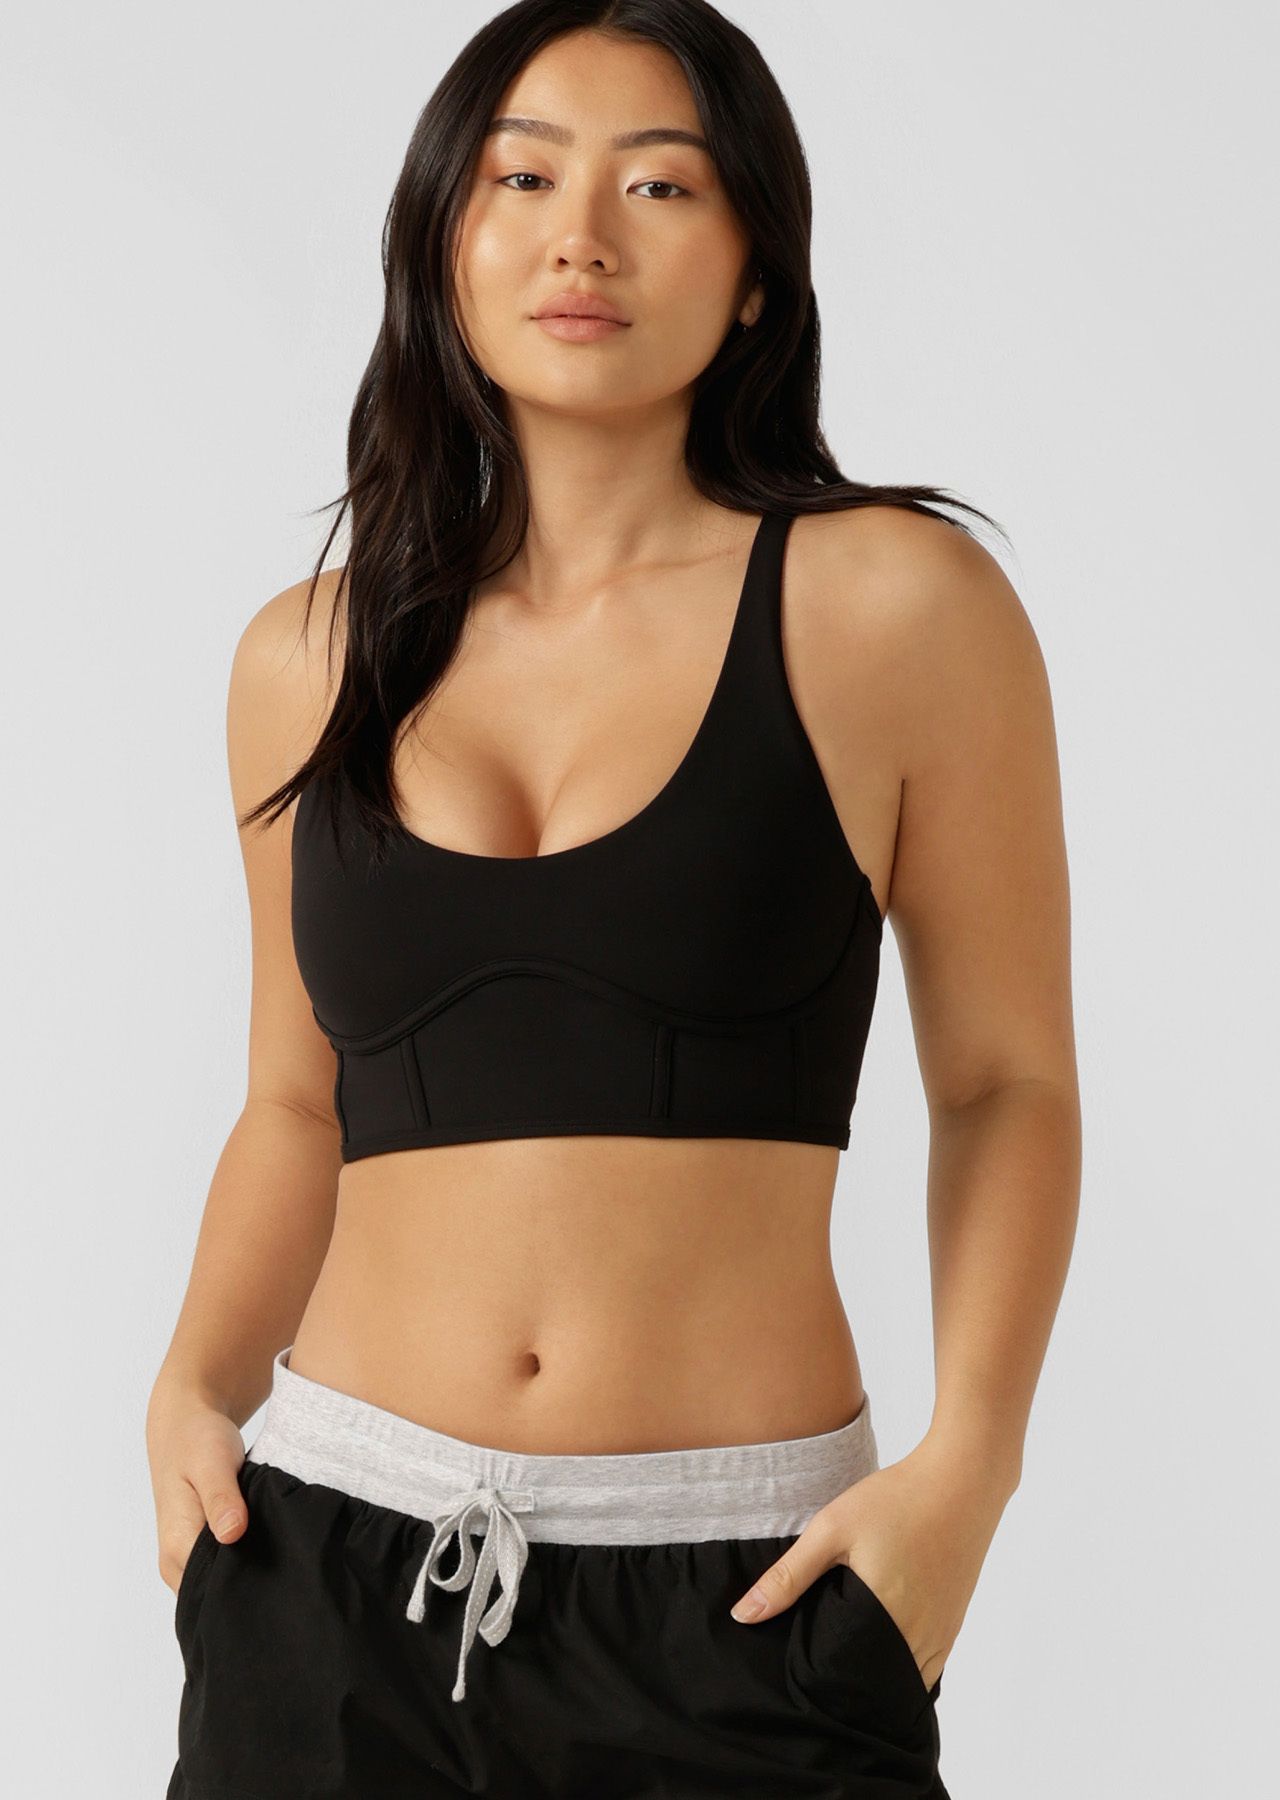 Athletic Works Women's Adjustable Back Sports Bra (34c), Delivery Near You